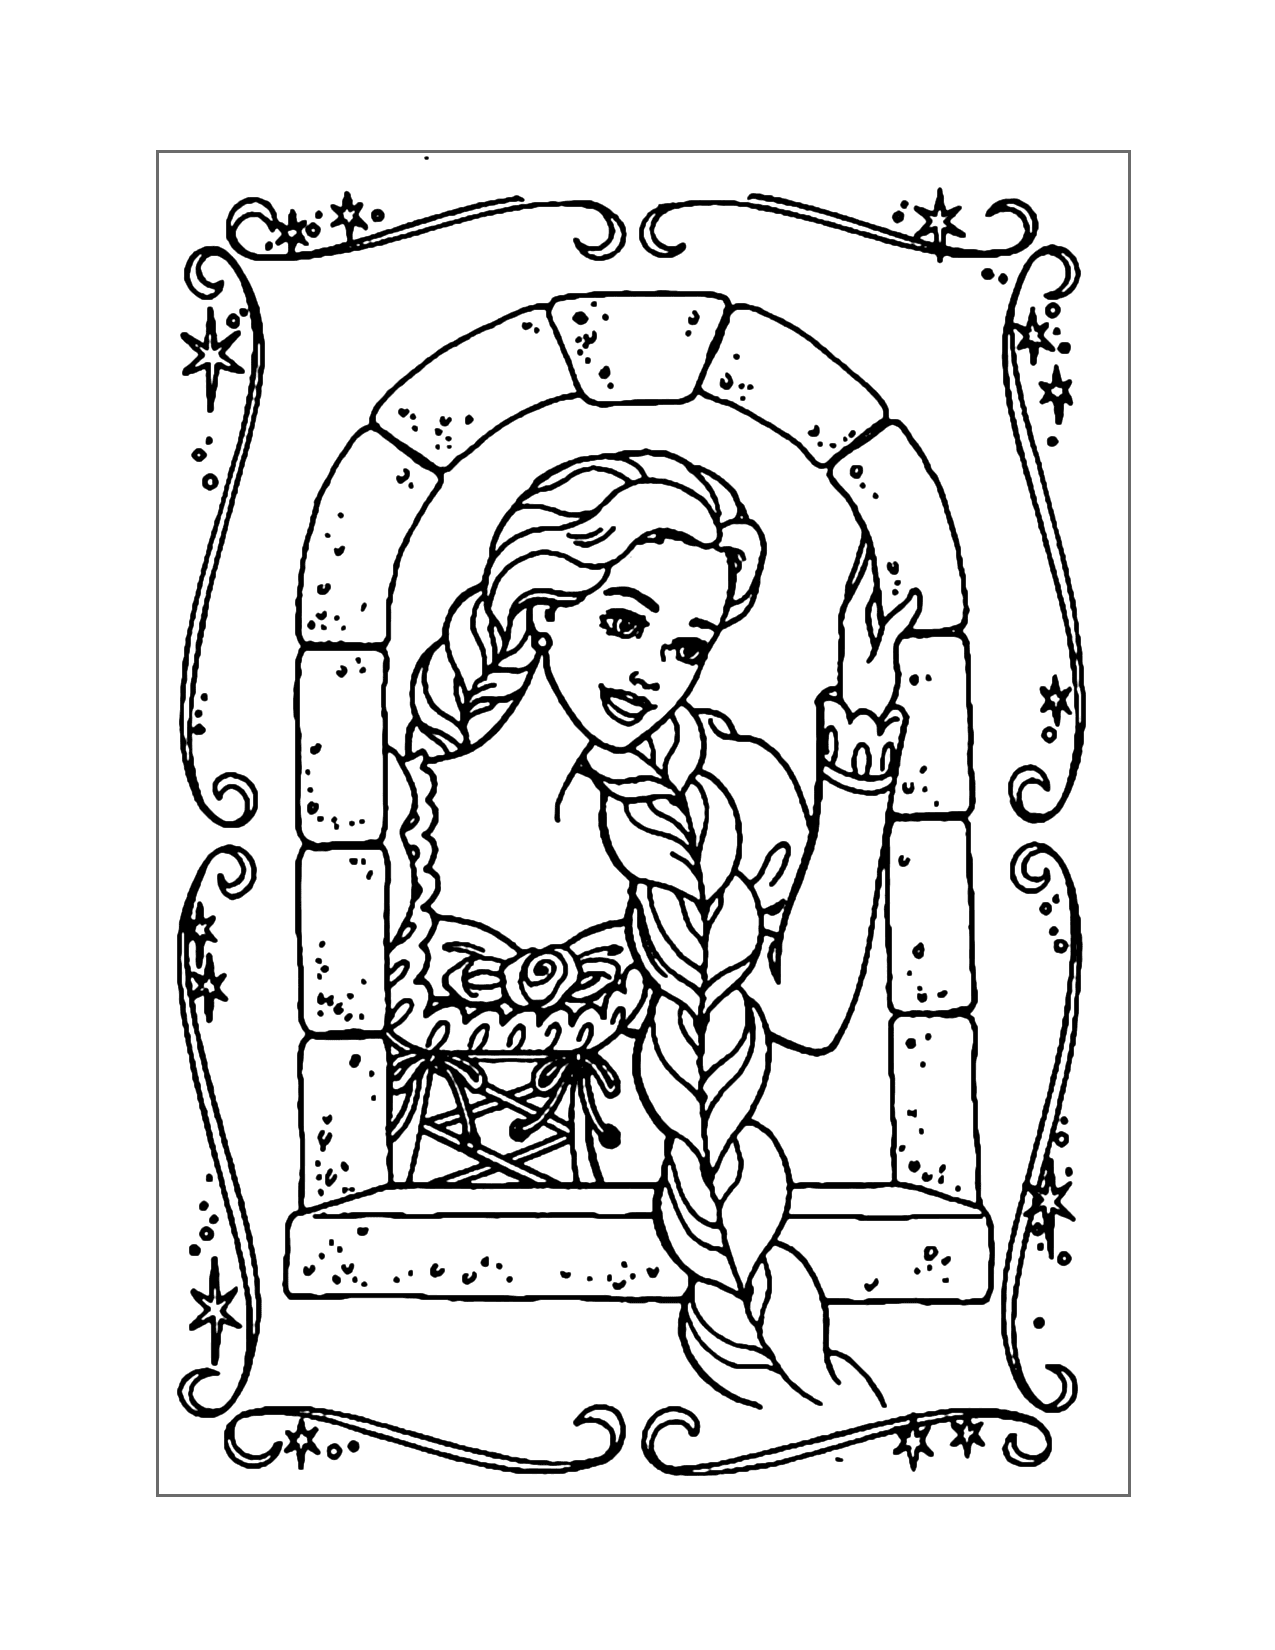 Rapunzel In The Window Coloring Page